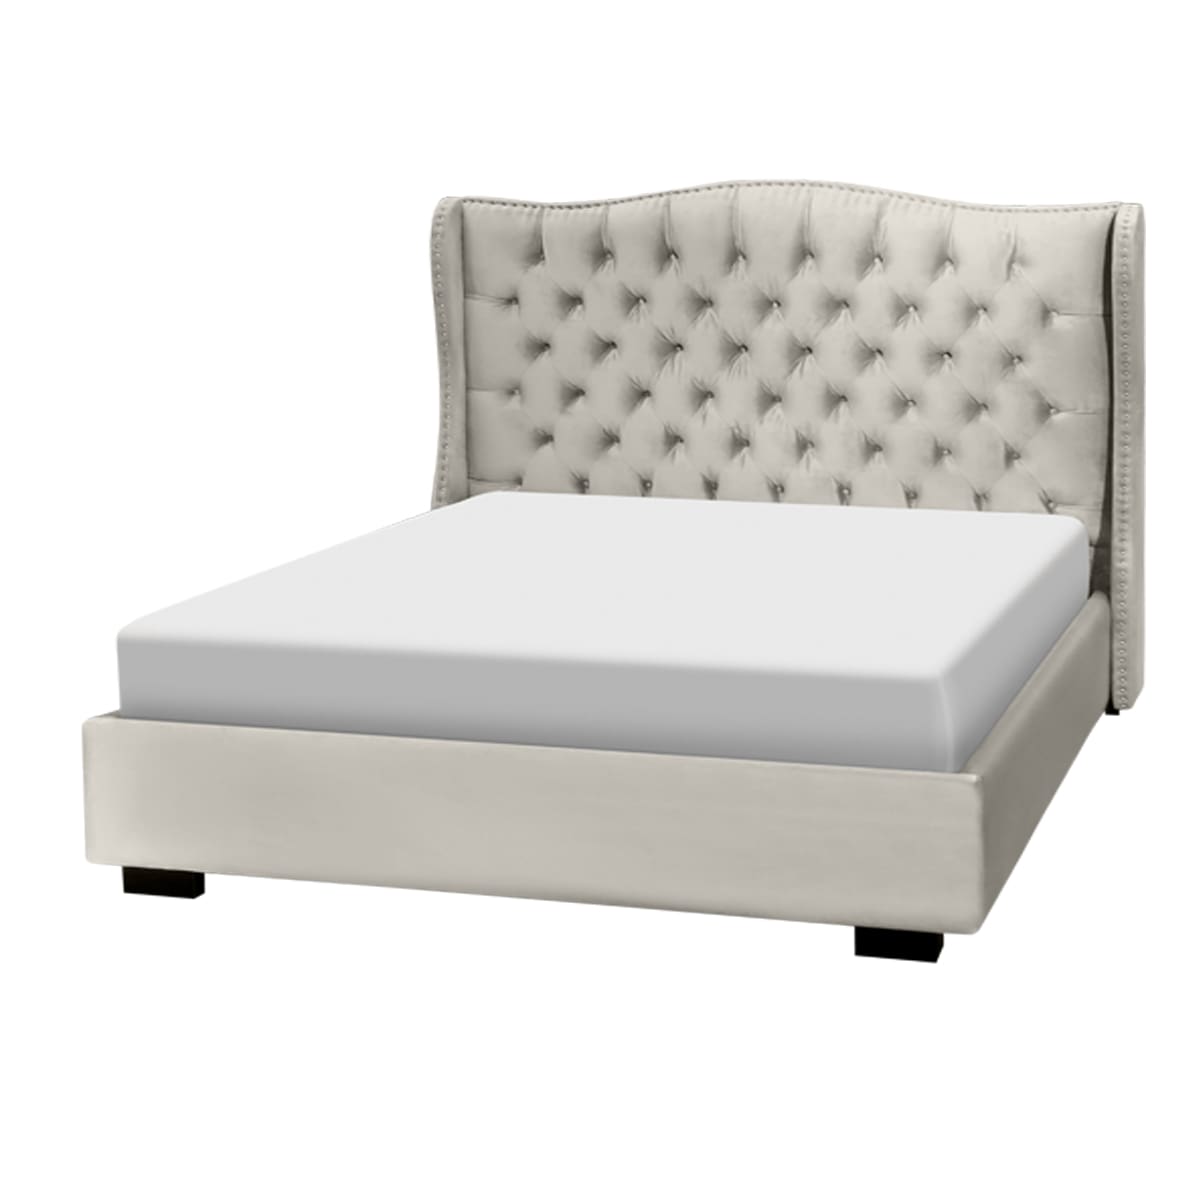 Catalina Upholstery Bed - $1799.99 - BED